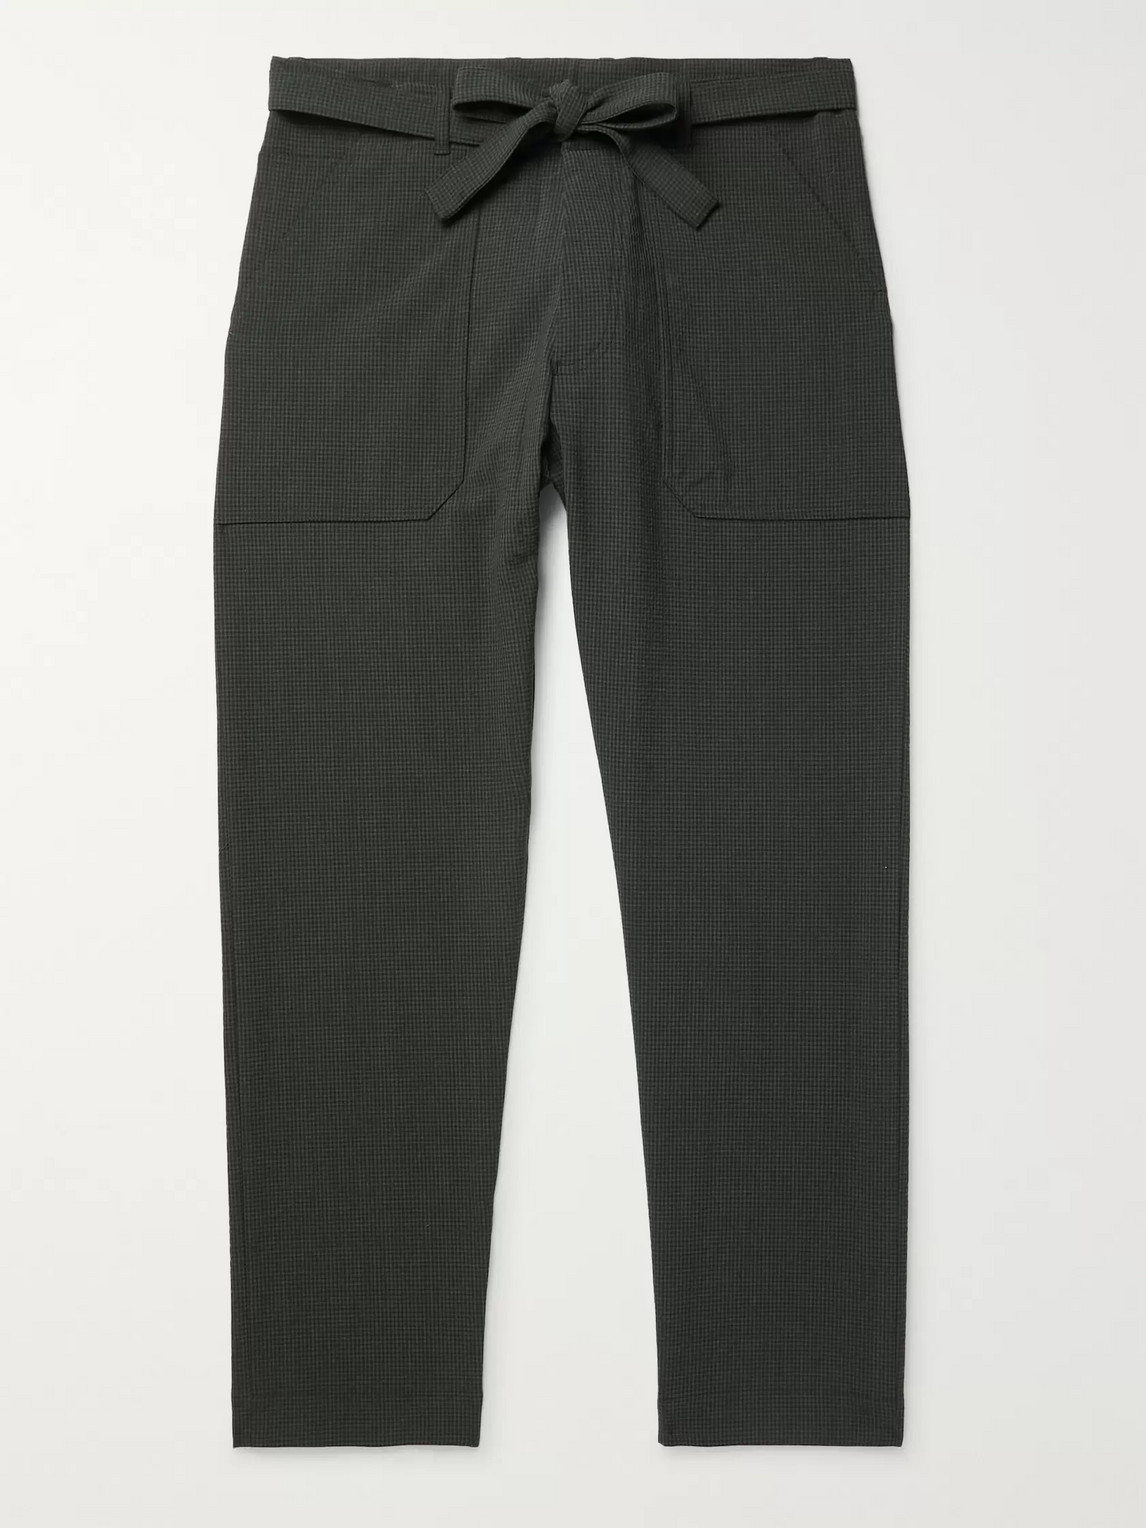 NANUSHKA RON SLIM-FIT BELTED CHECKED SEERSUCKER SUIT TROUSERS